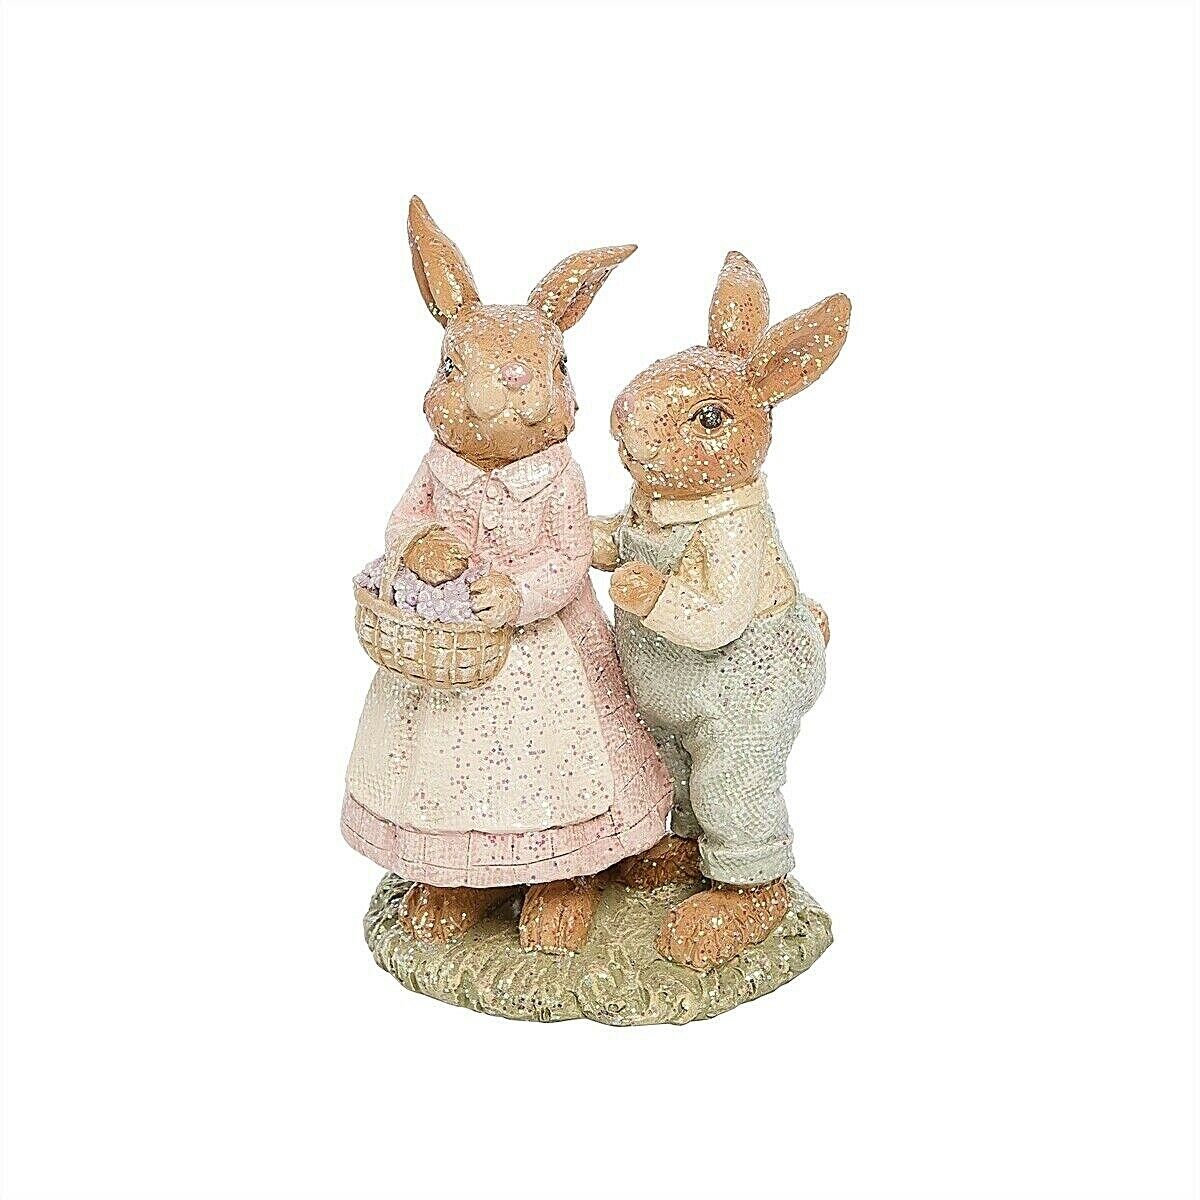 Primitive Spring Easter Farm Rabbit Couple Figurine Collectable - The Primitive Pineapple Collection